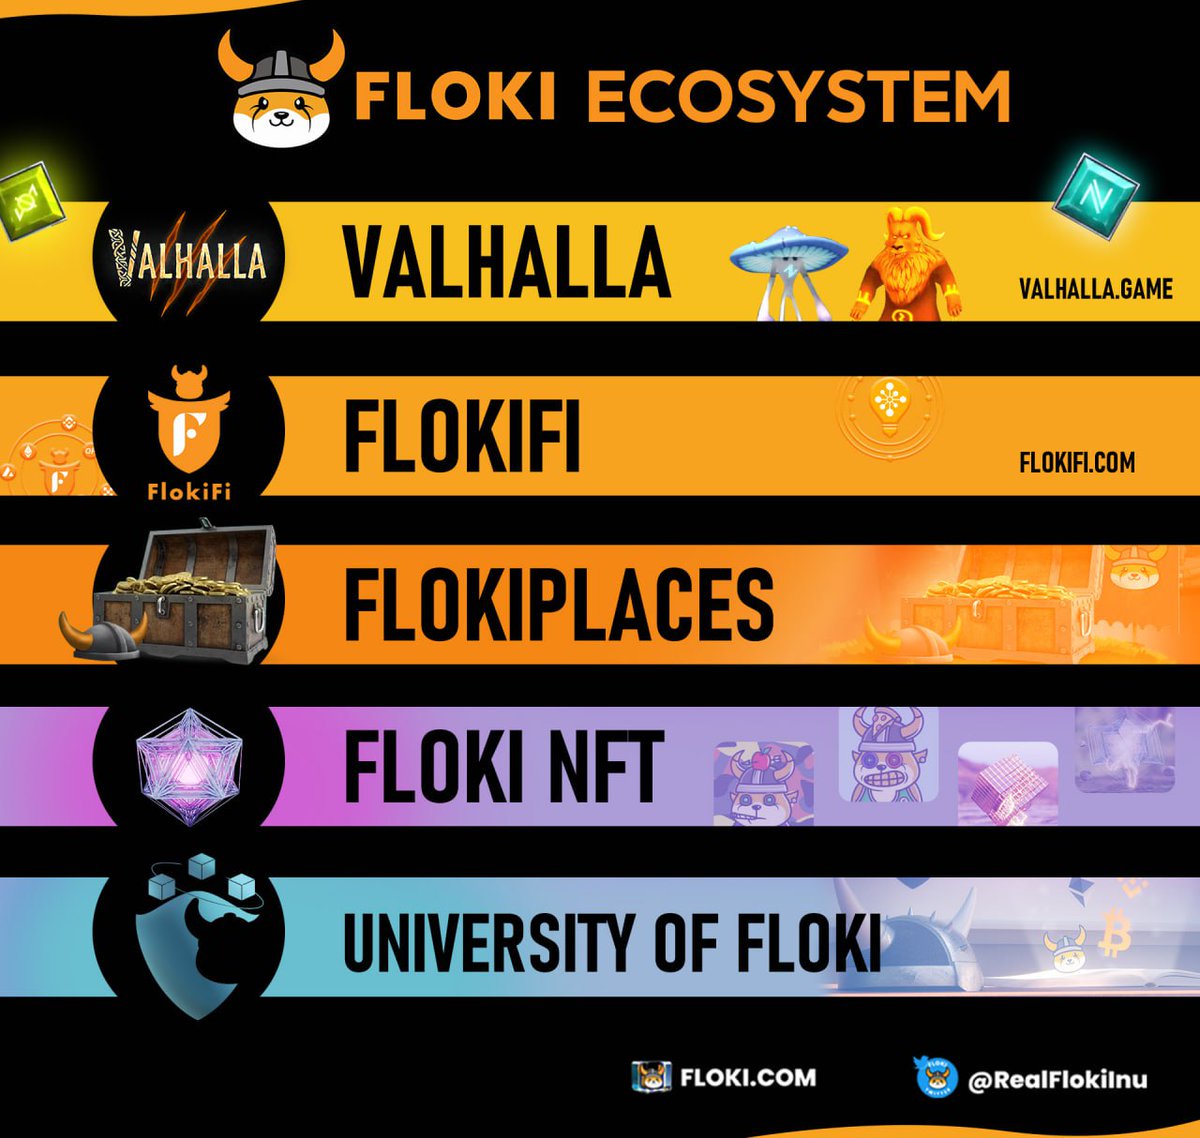 Why $FLOKI, @RealFlokiInu...?

1) Brand recognition is amazing
2) The team is world class and international
3) The community is growing fast and very active
4) Partnerships with leaders in #defi
5) Partnerships with international companies and sportsclubs
6) Amazing #gaming…